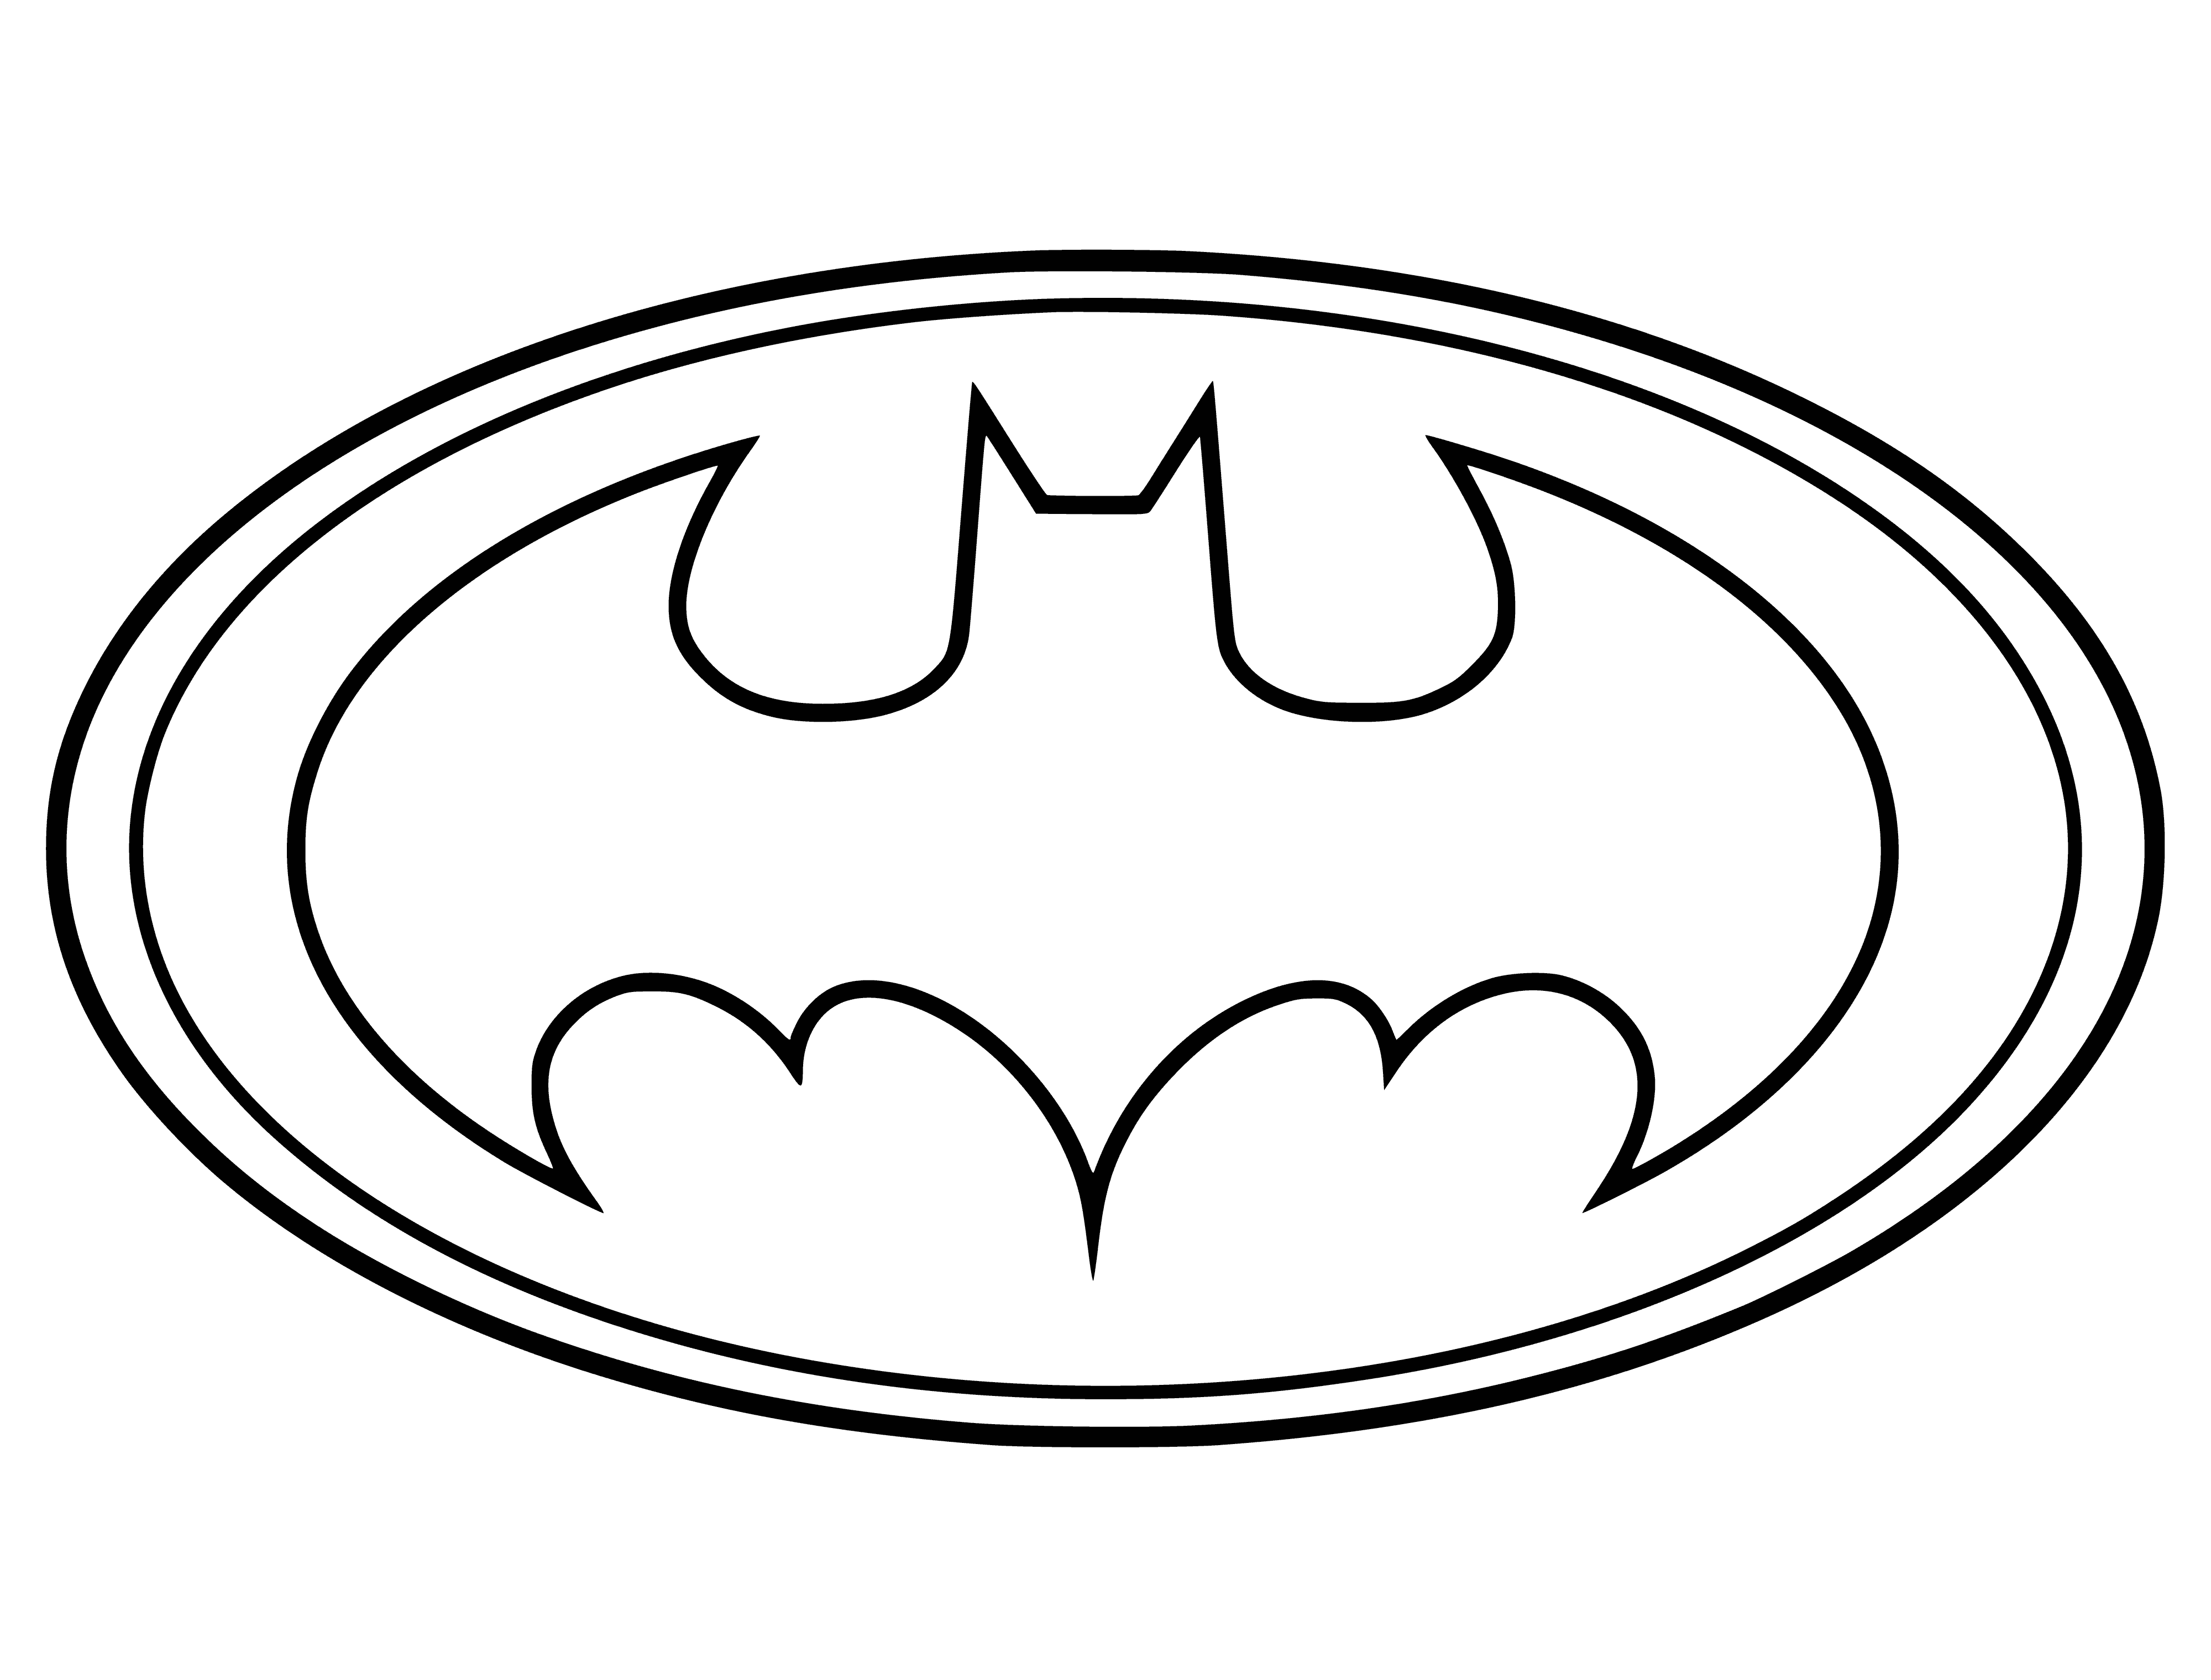 coloring page: Sign with yellow Batman font from 1960s TV show appears on black background: "Batman - Batman."